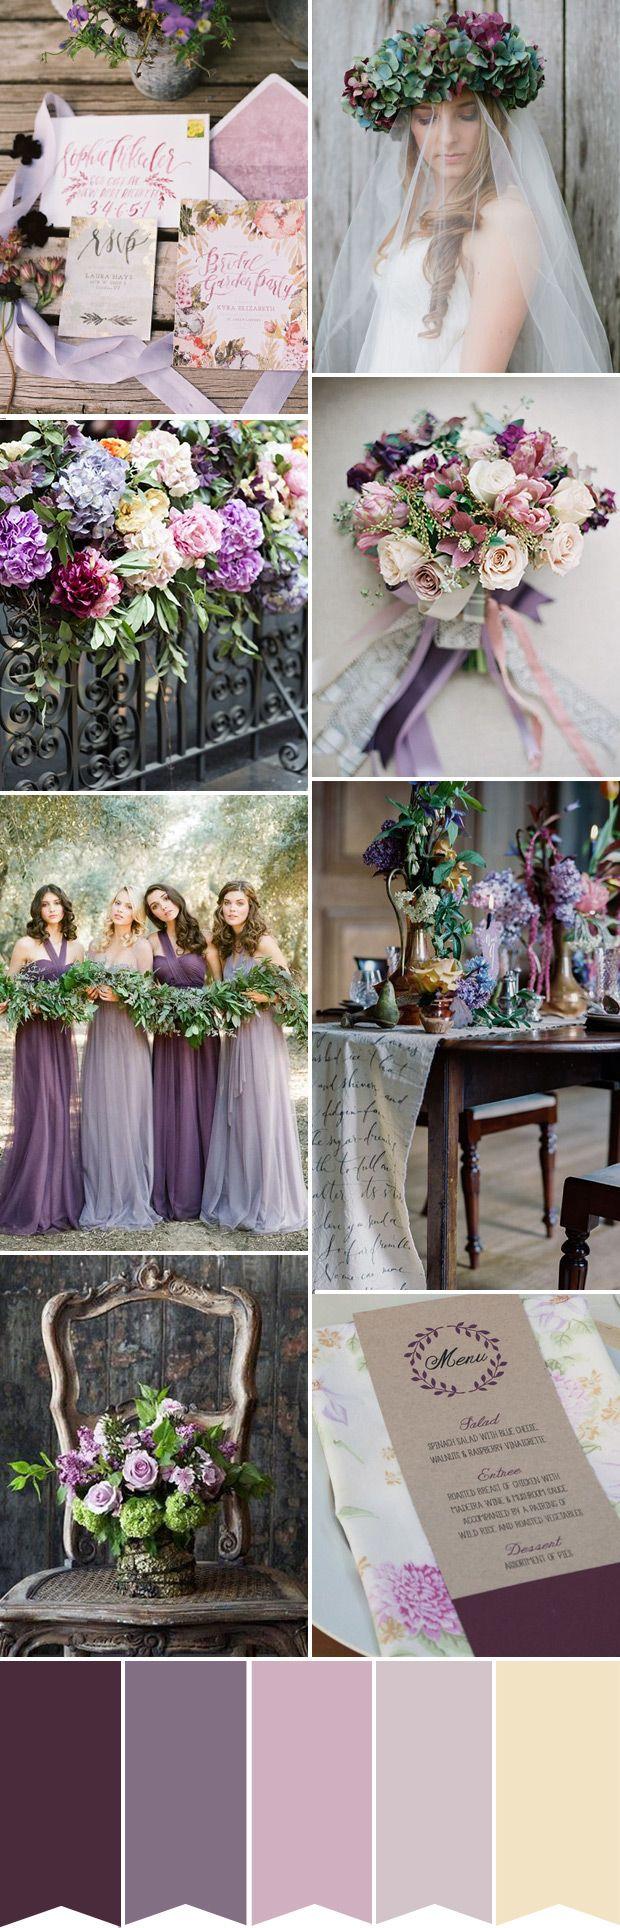 Wedding - The Perfect Look For A Purple Wedding In 2015